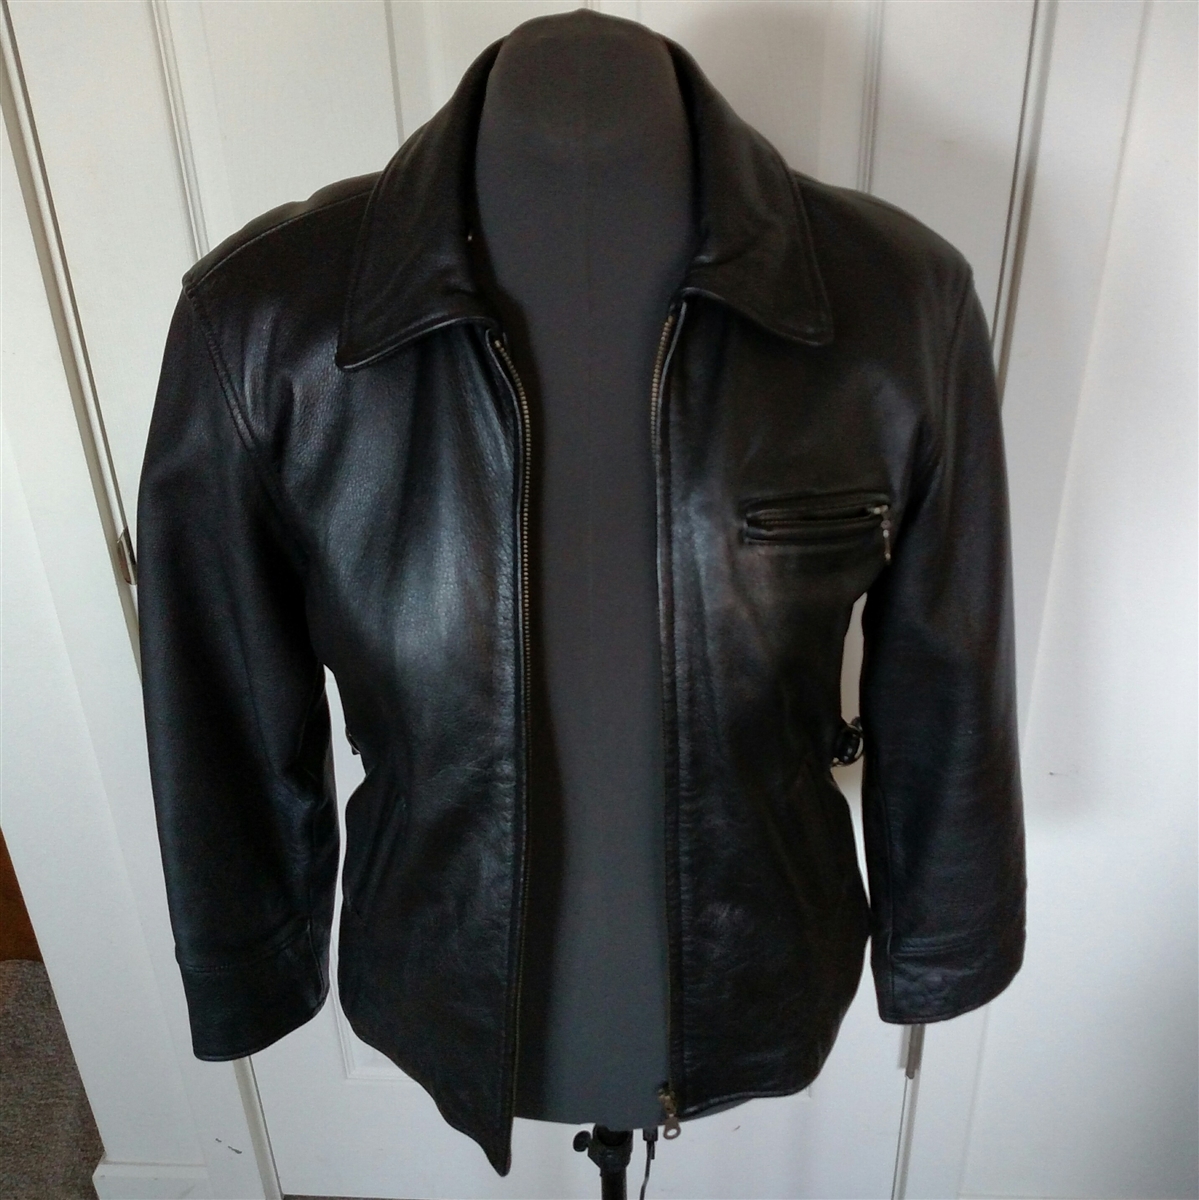 Mossimo vintage brown leather women jacket coat